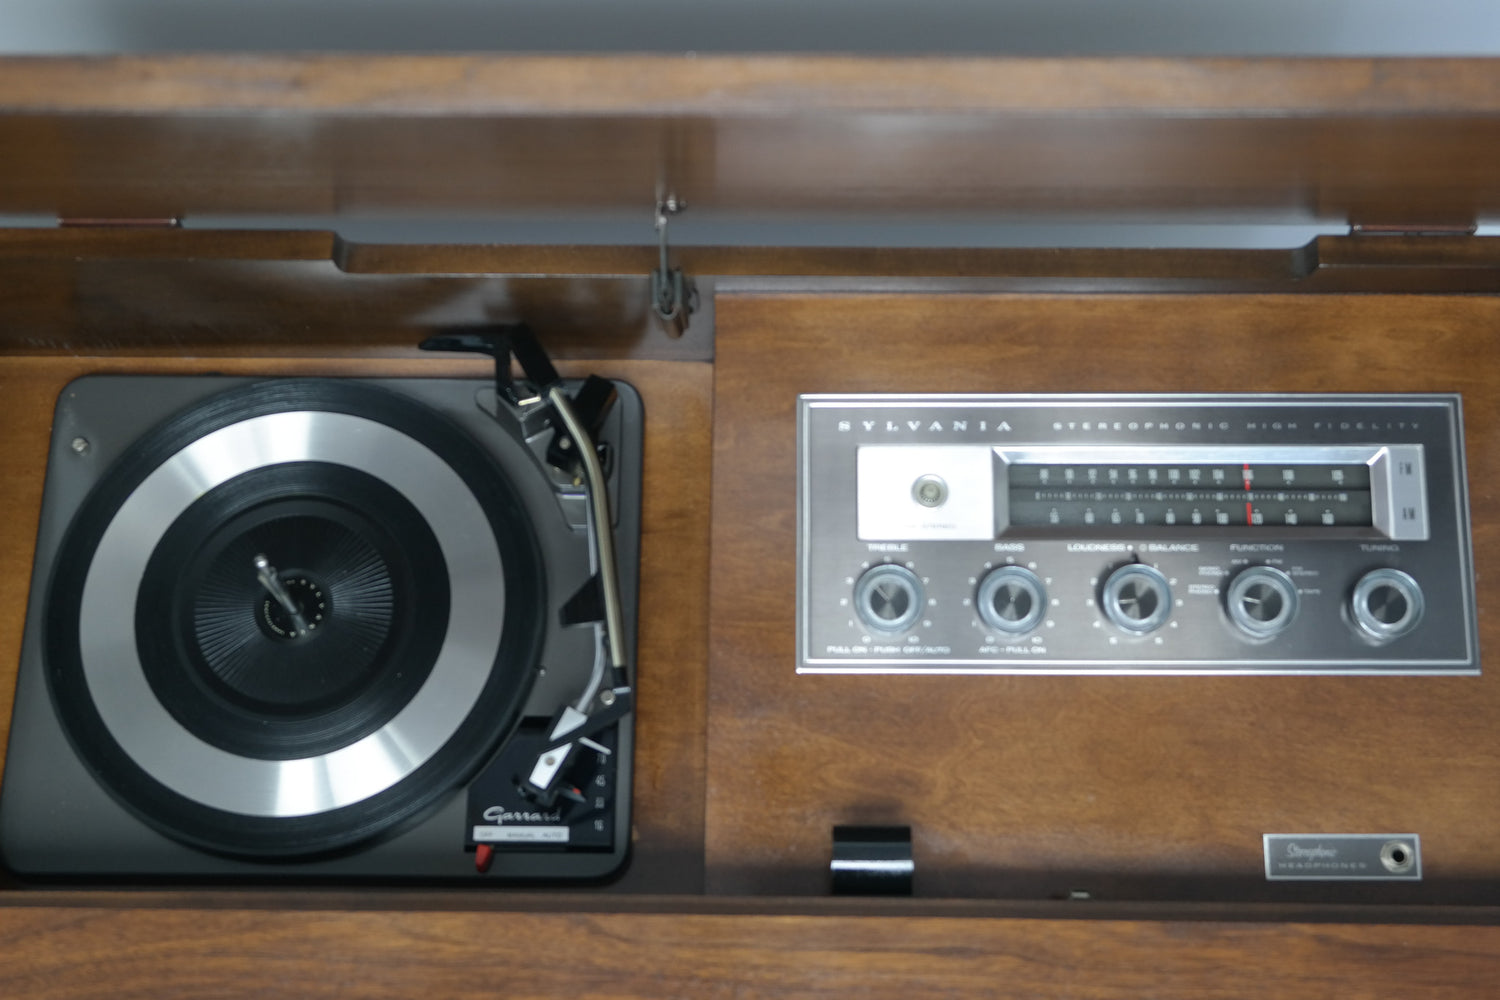 Mid Century Sylvania Stereo Console Record Player - Bluetooth iPod iPhone Android Input AM/FM Tuner The Vintedge Co.